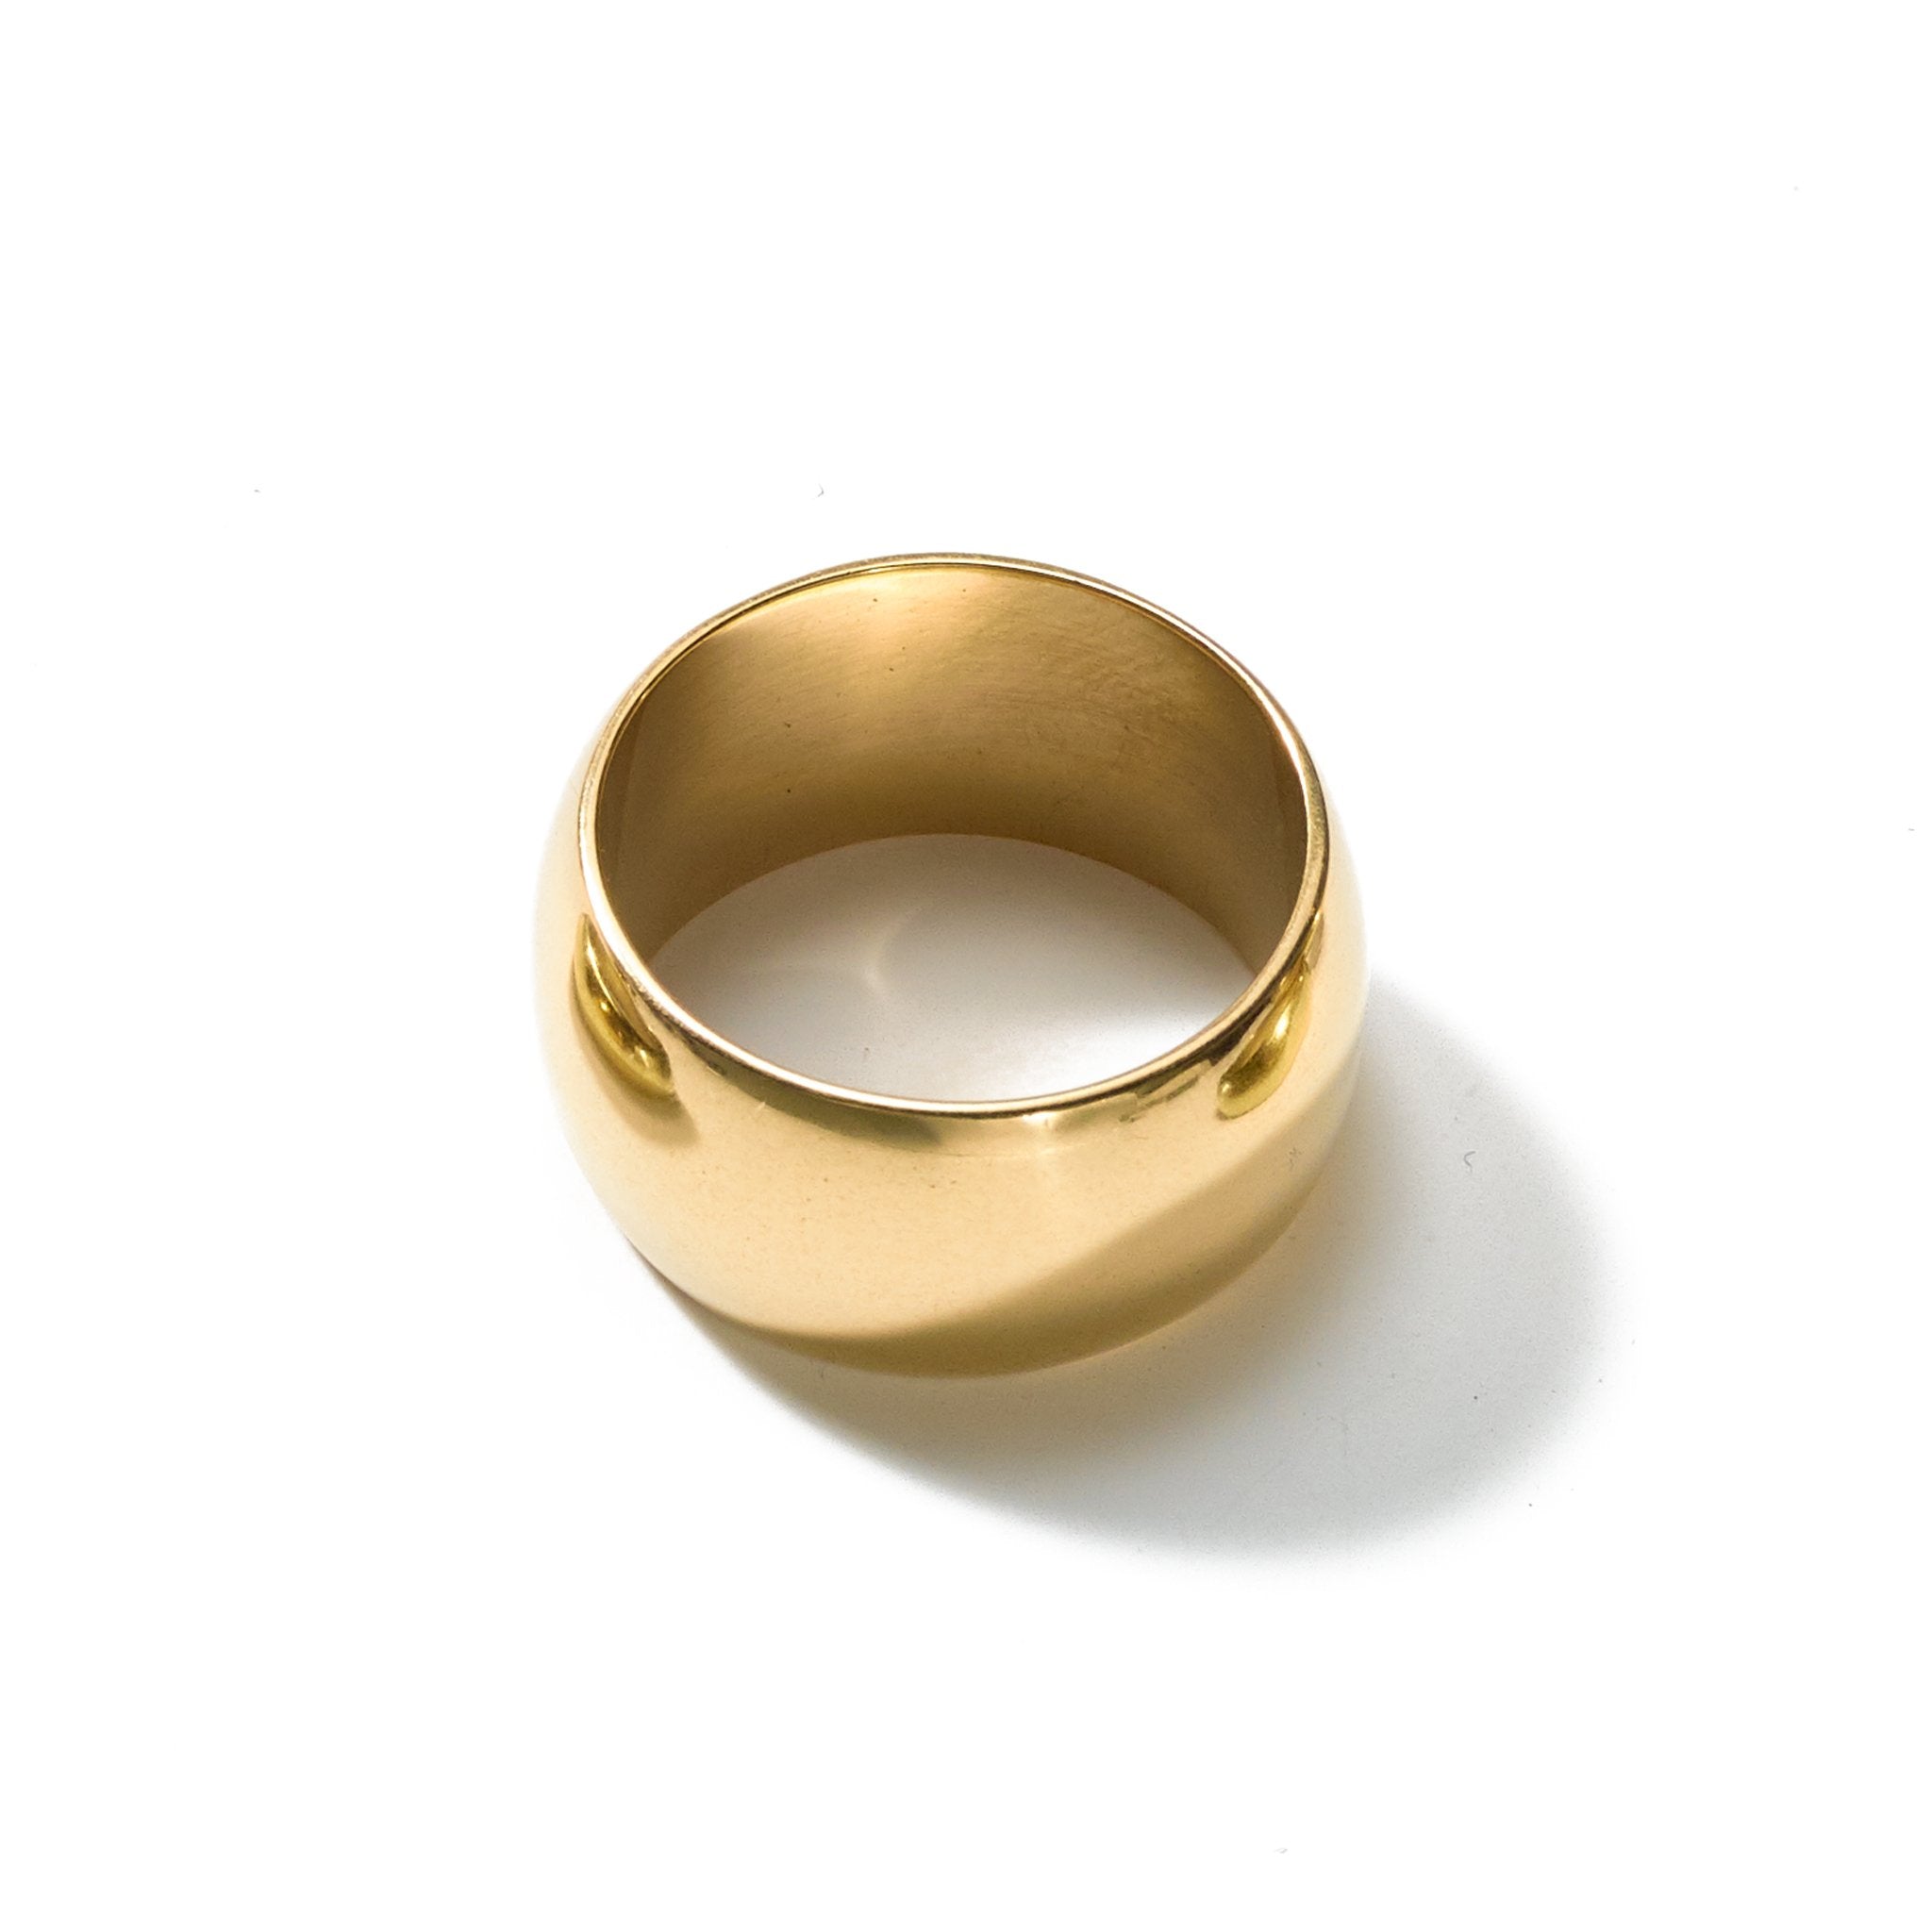 A simple yet elegant size 6 ring handcrafted from upcycled brass, featuring a wide width, and made to be worn every day.